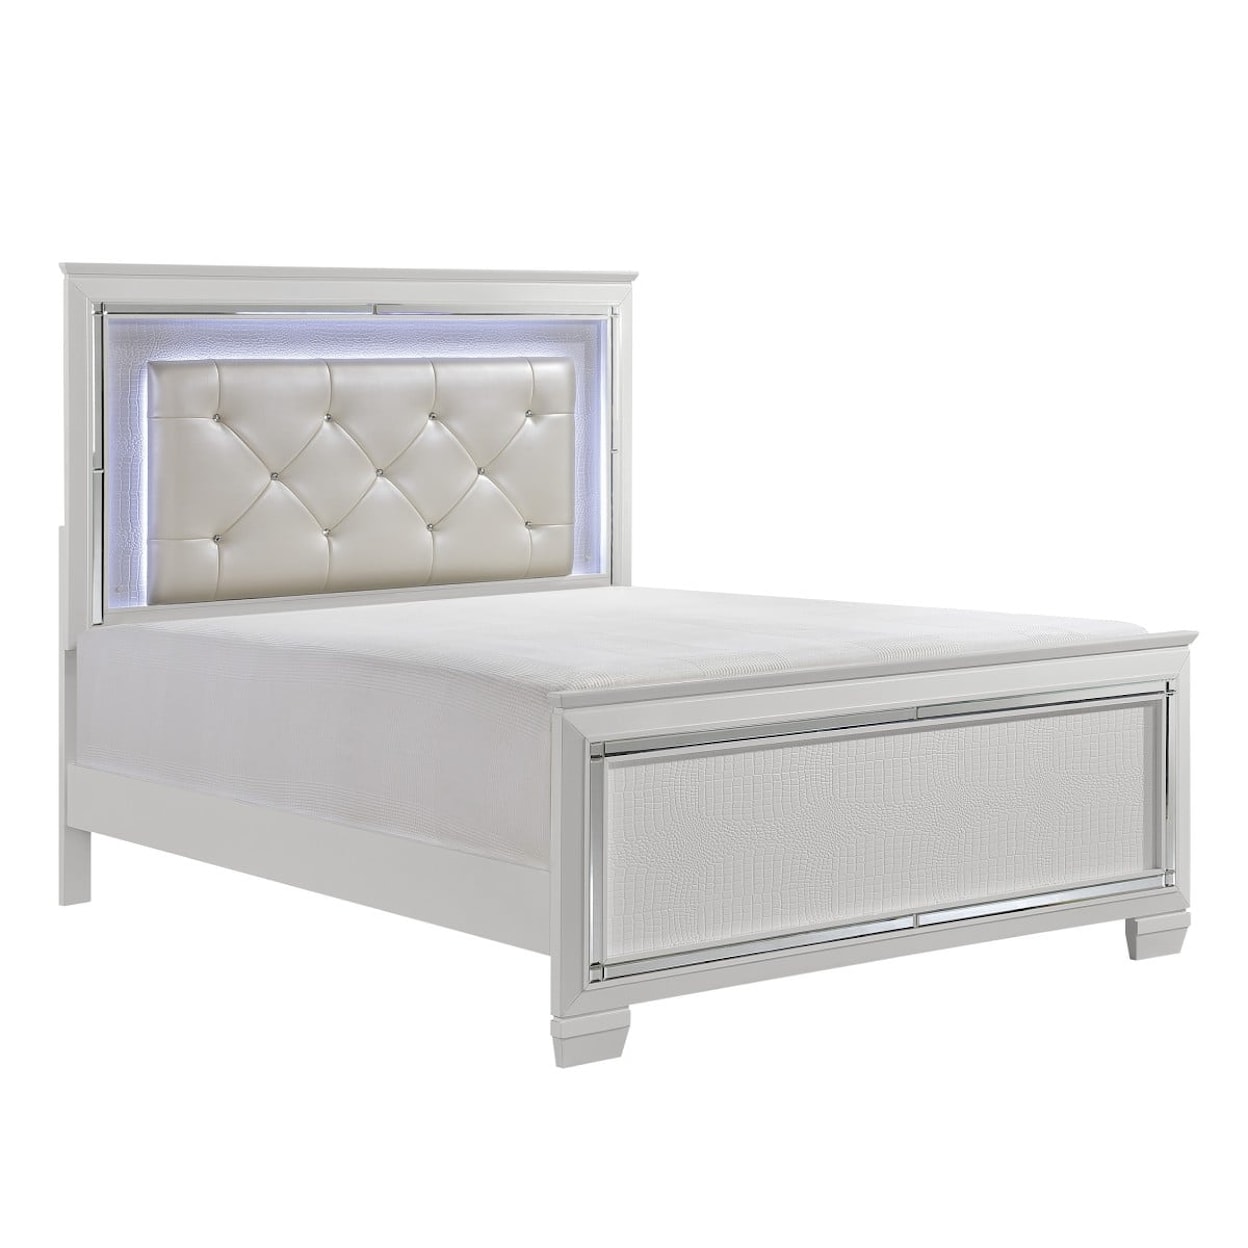 Homelegance Furniture Allura Queen Bed with Led Lighting